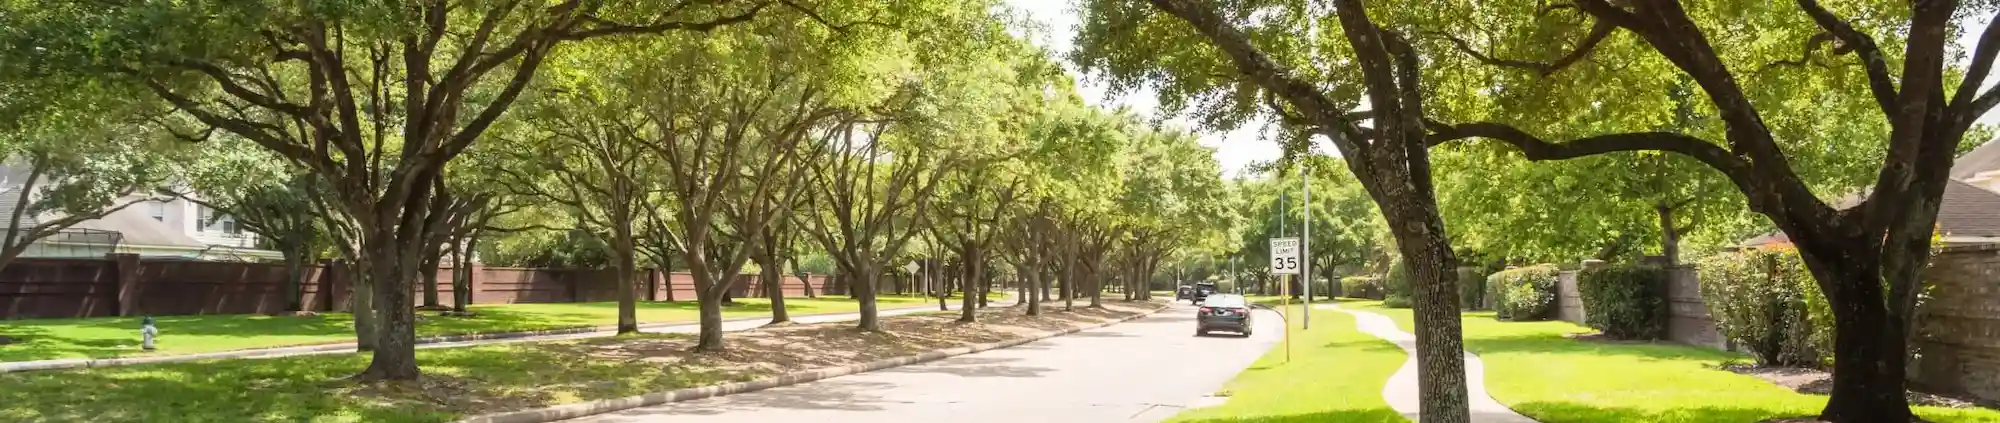 Suburban neighborhood street lined with trees  - Keep pests away from your home with Inman-Murphy, Inc.